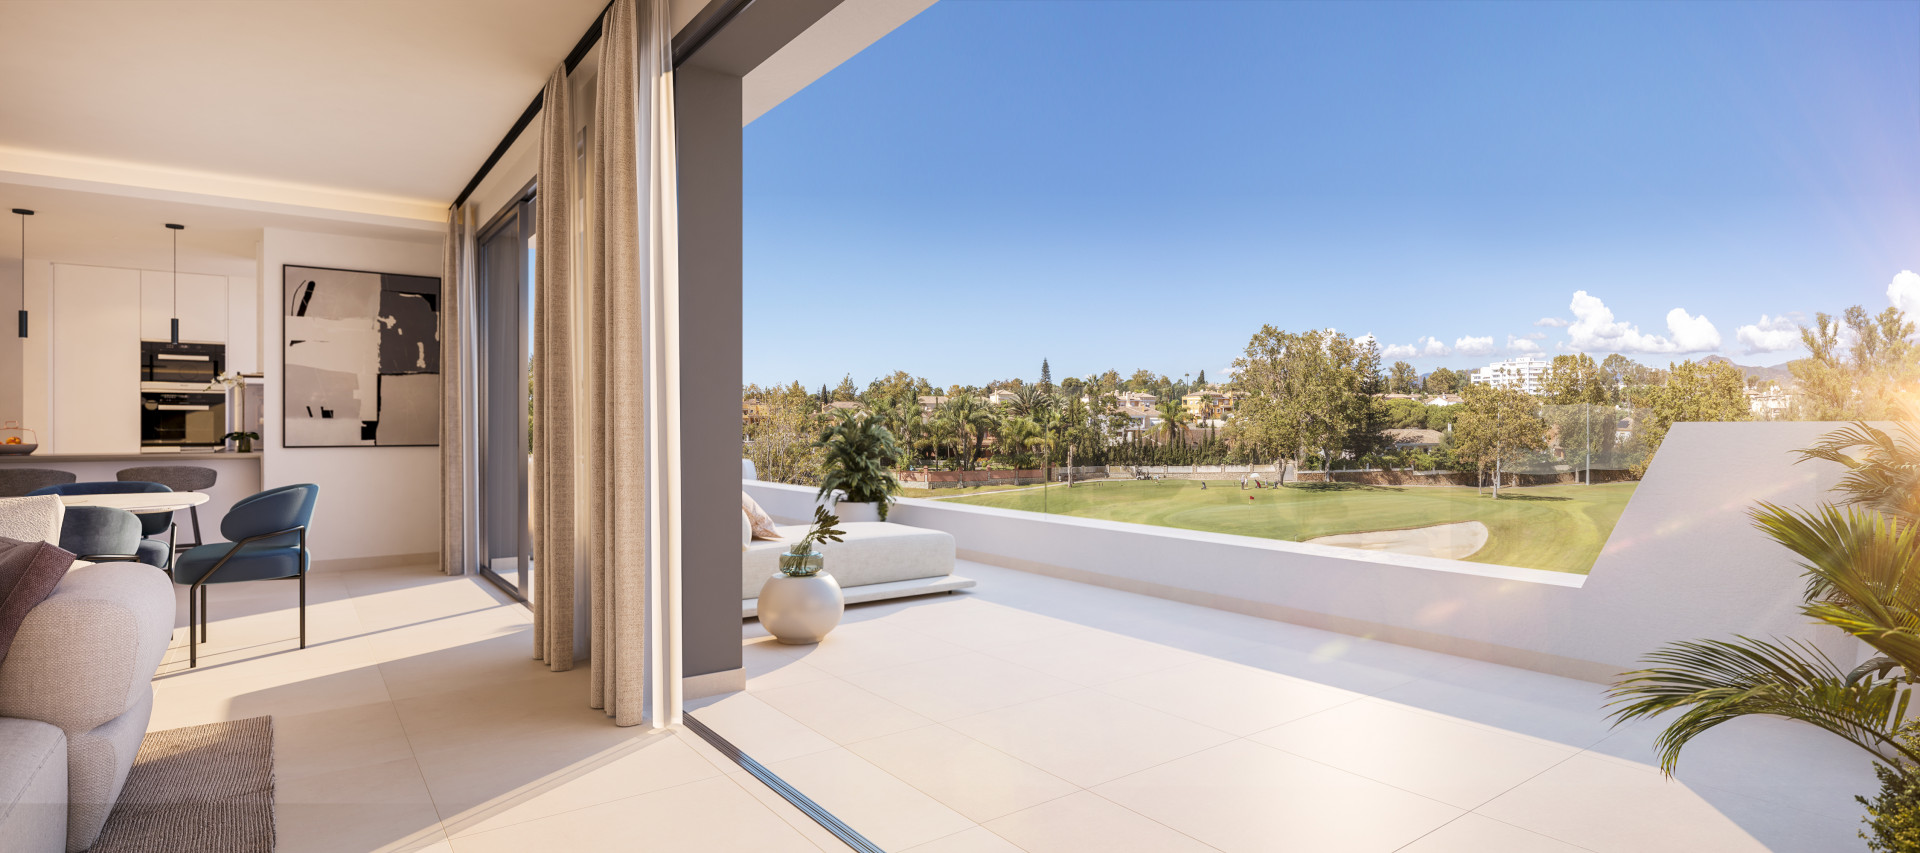 Exclusive and spacious penthouse with stunning views over Guadalmina Alta